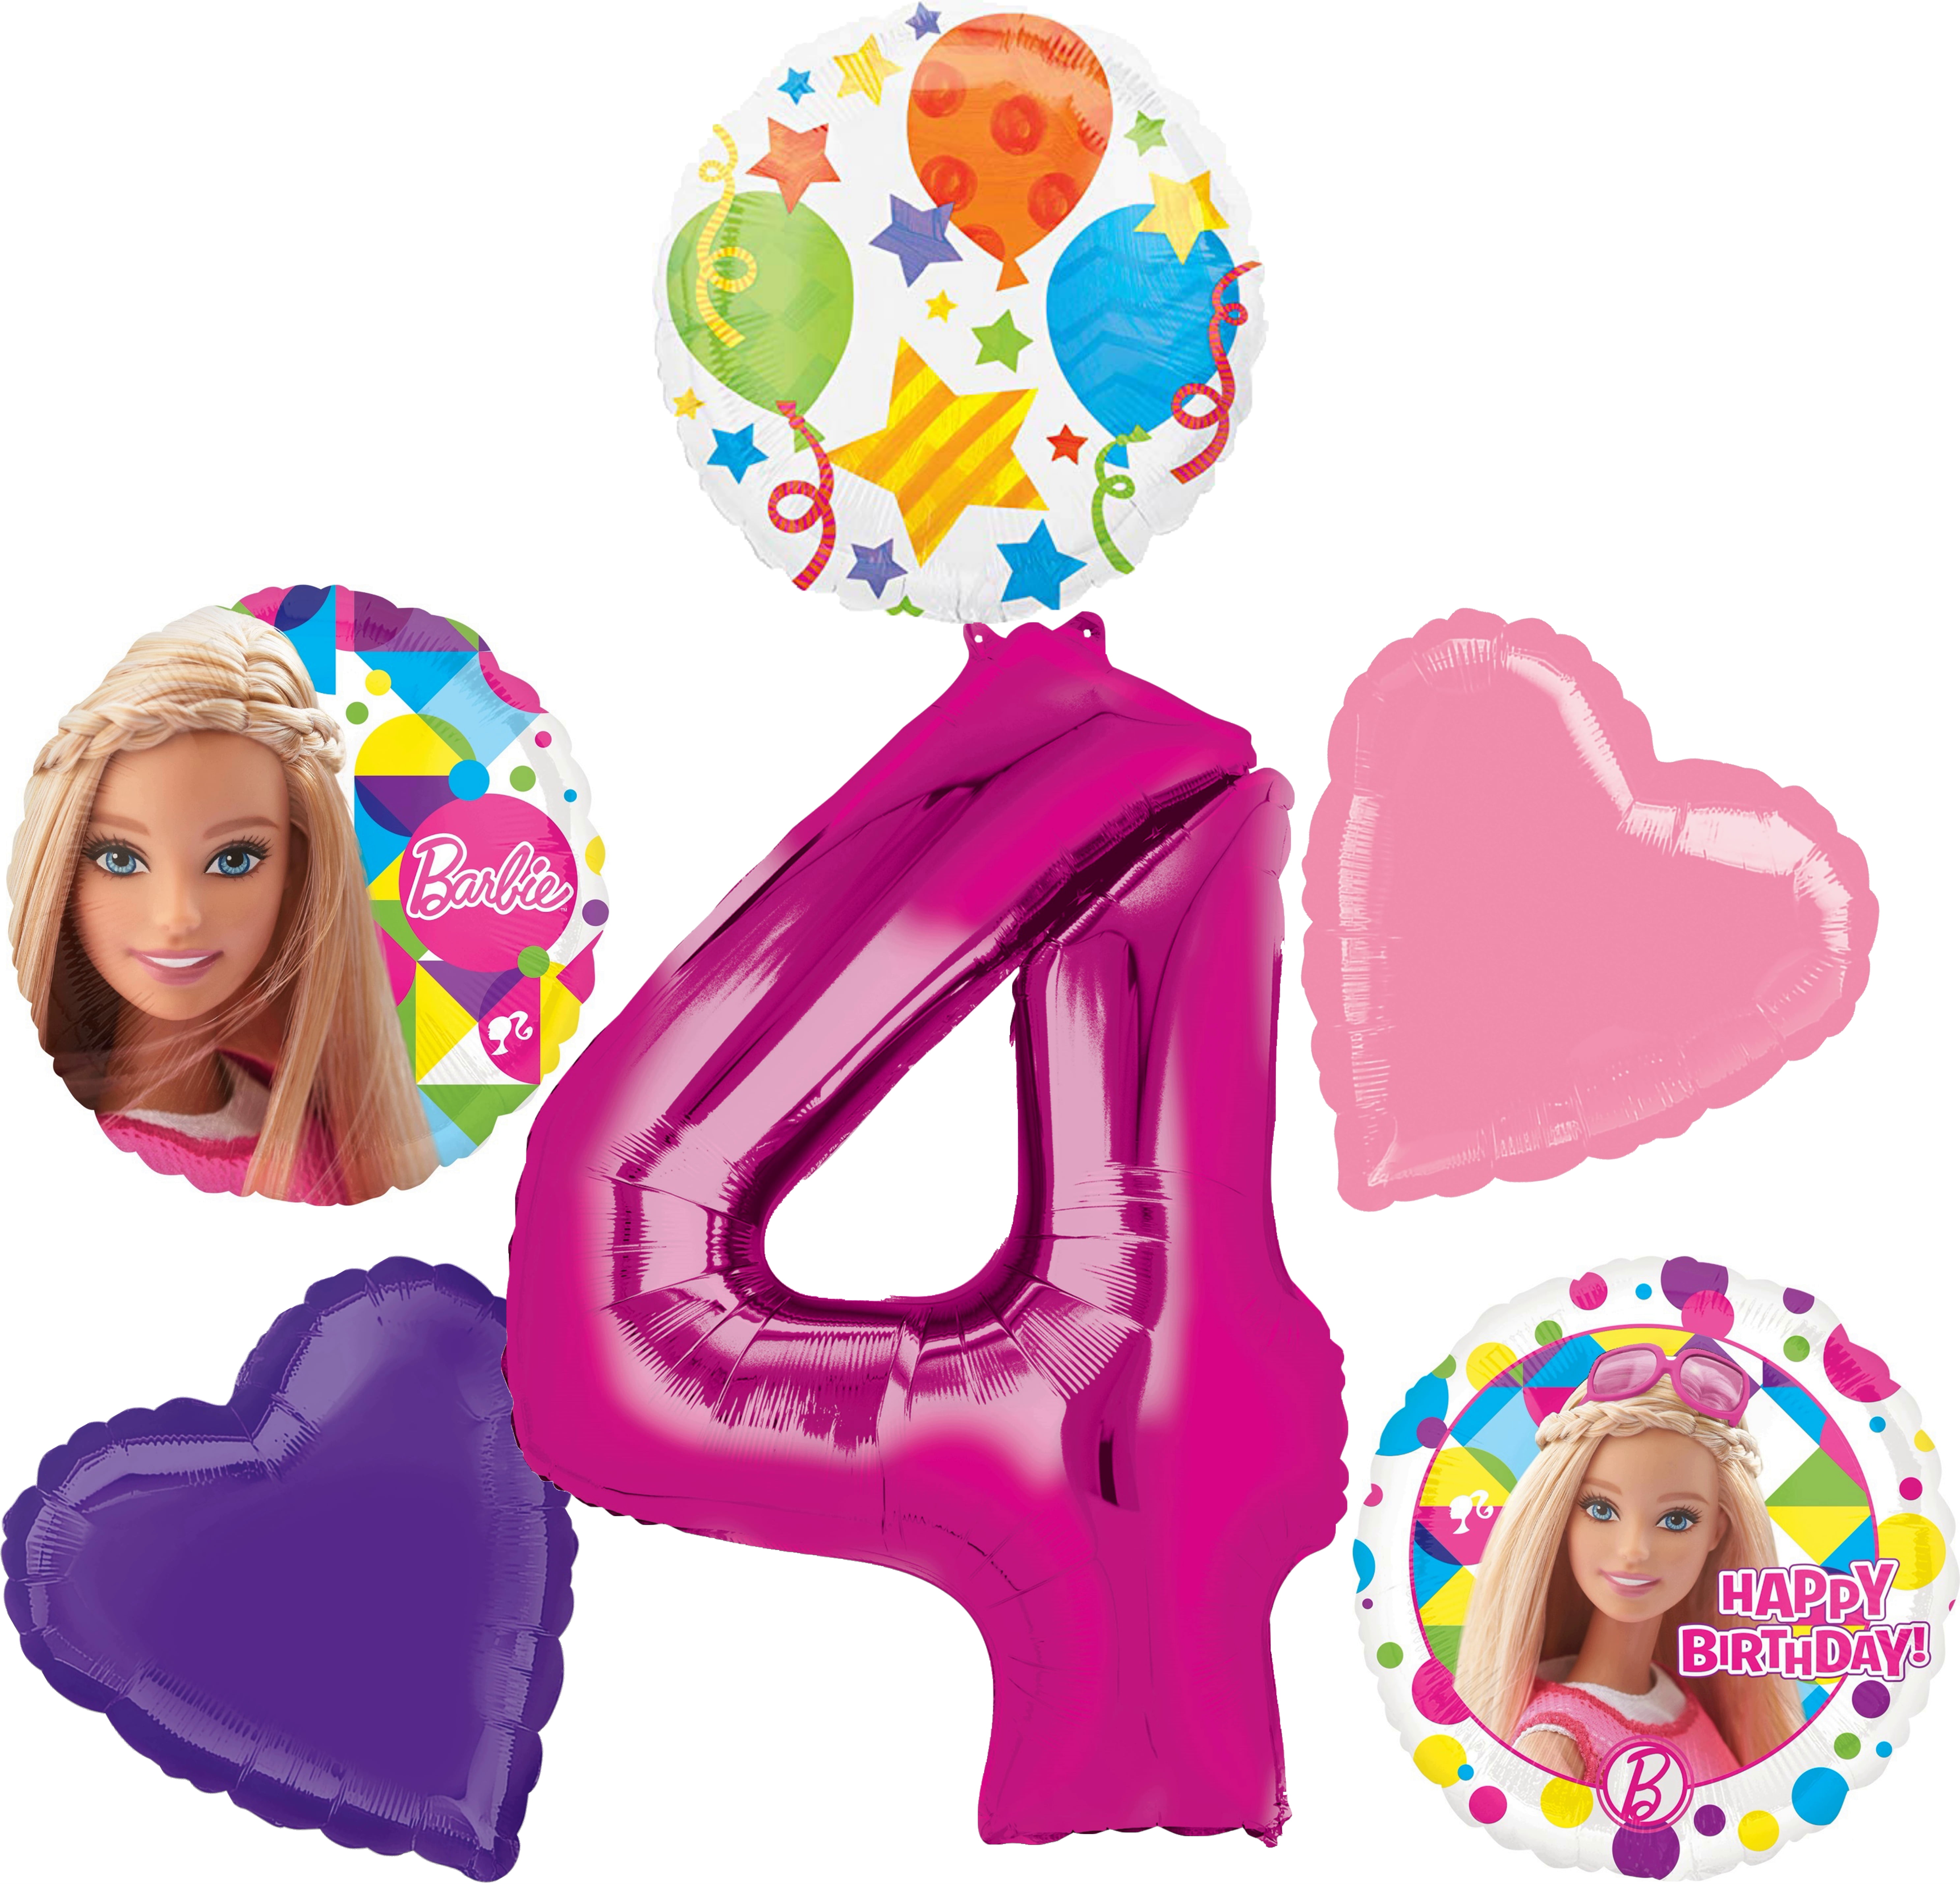 Details about   7 pc Barbie Mermaid Heart Balloon Bouquet Party Decoration Doll Happy Birthday 